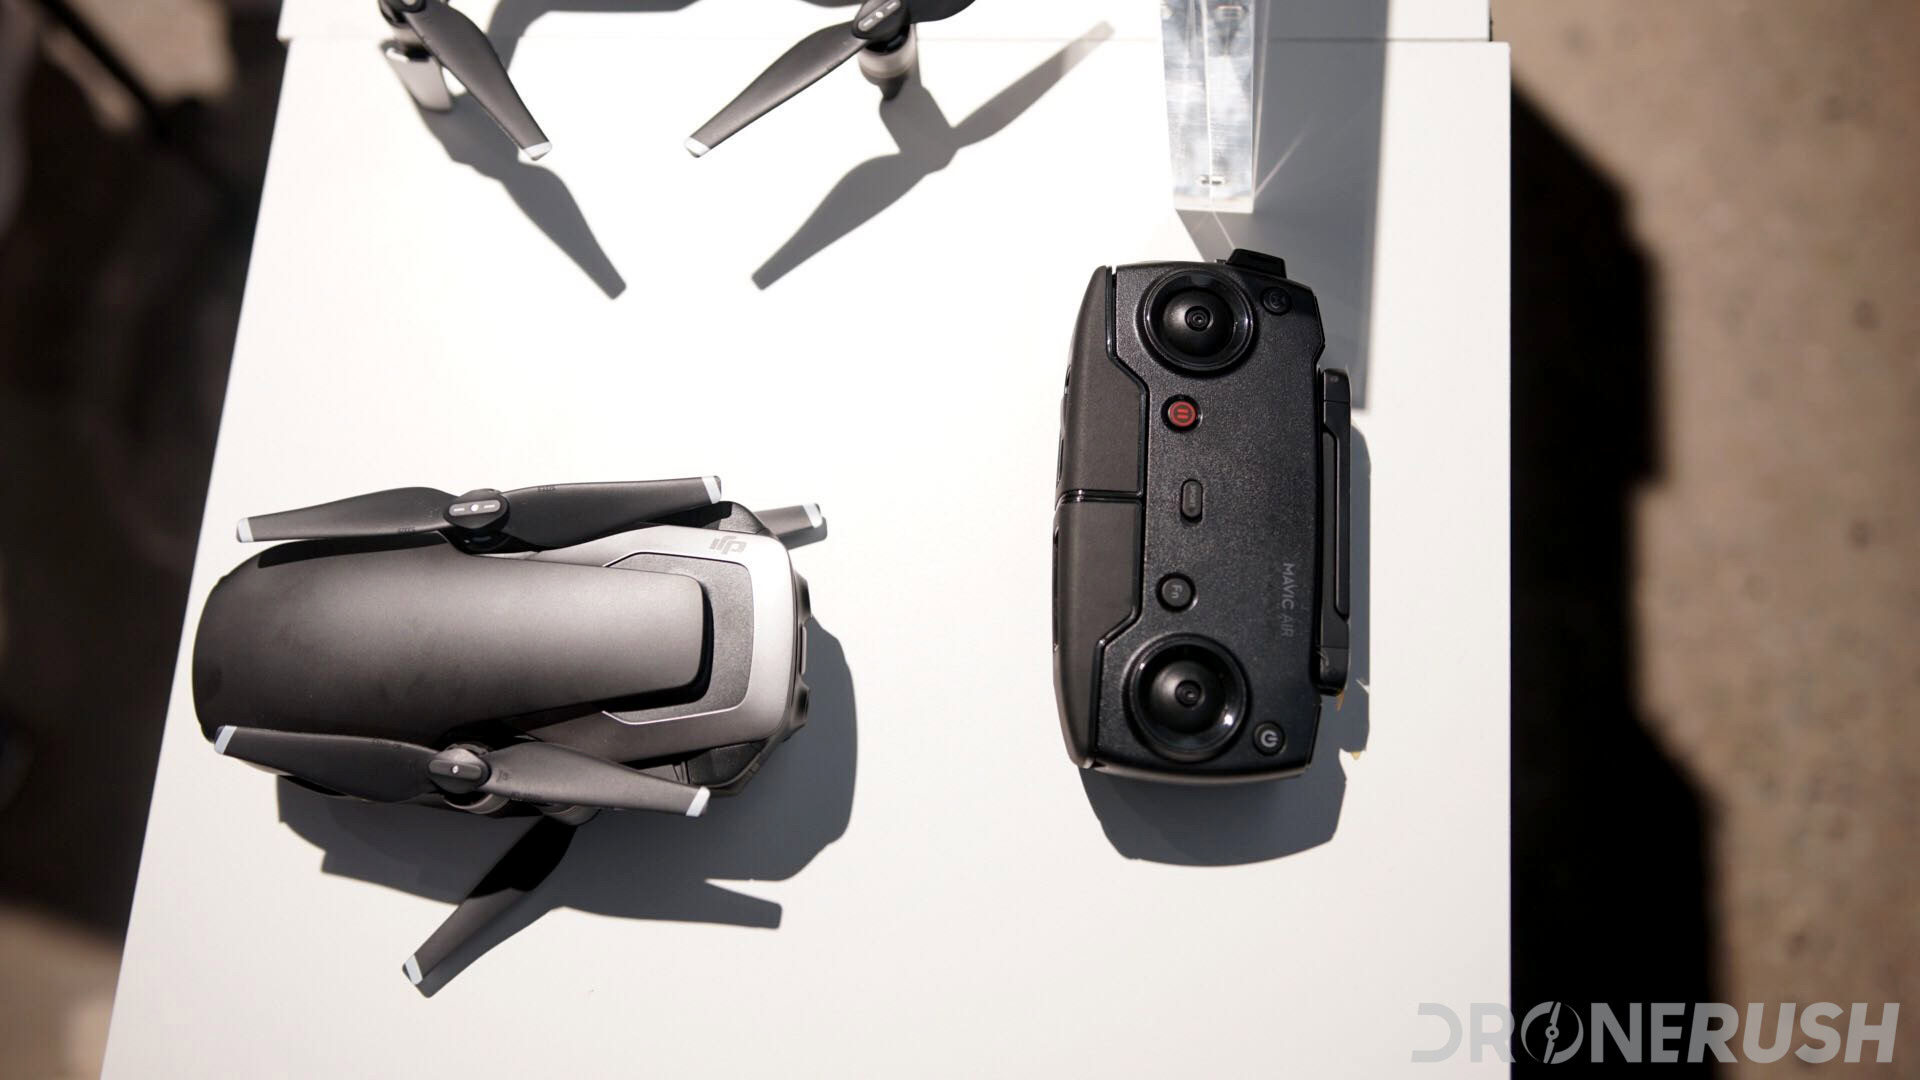 DJI Mavic Air price, release date, and availability